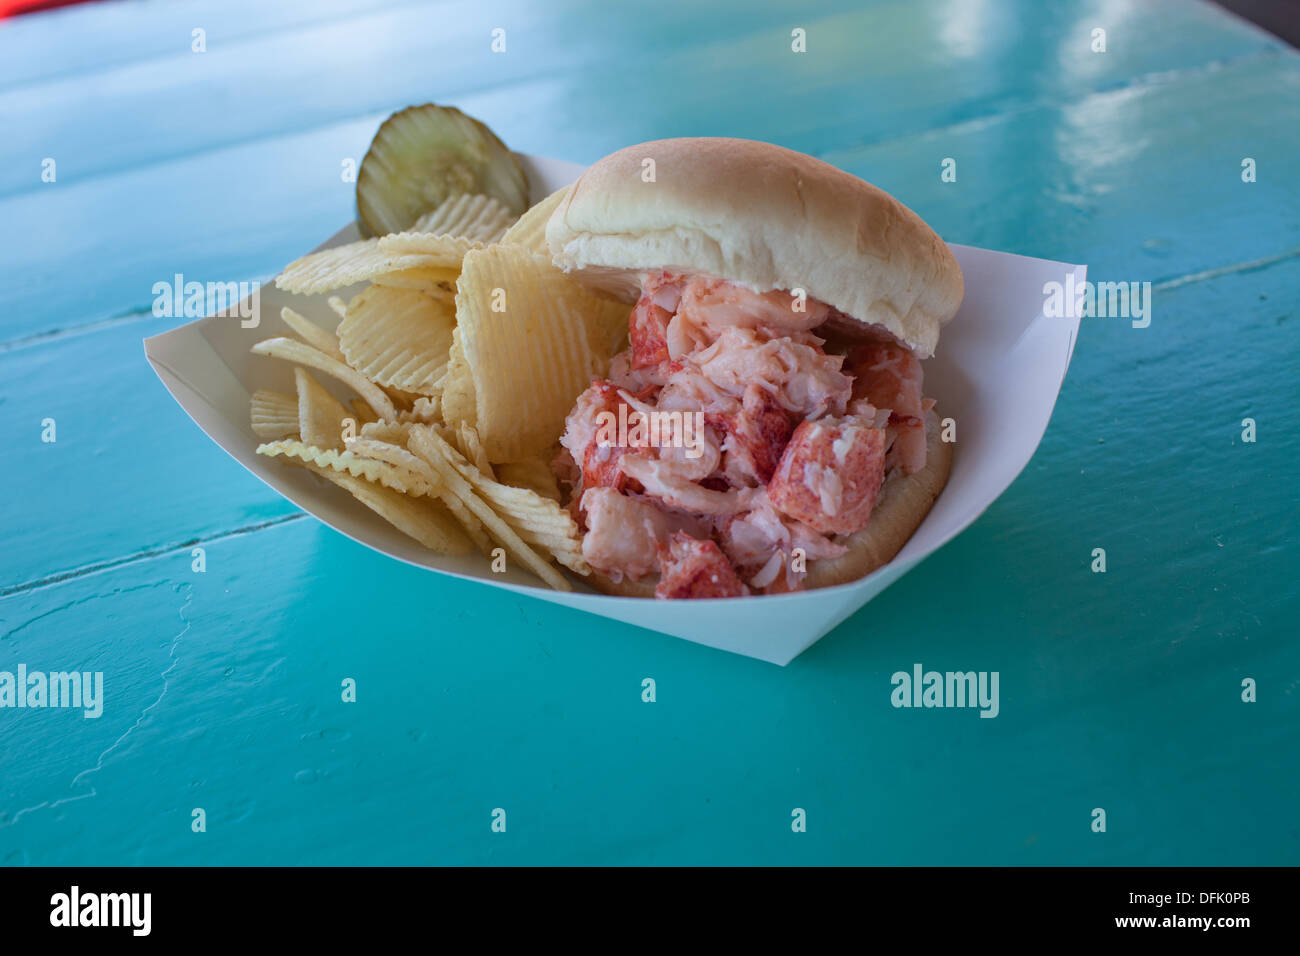 Chauncey Creek Lobster Pier Lobster Roll on a picnic table Stock Photo